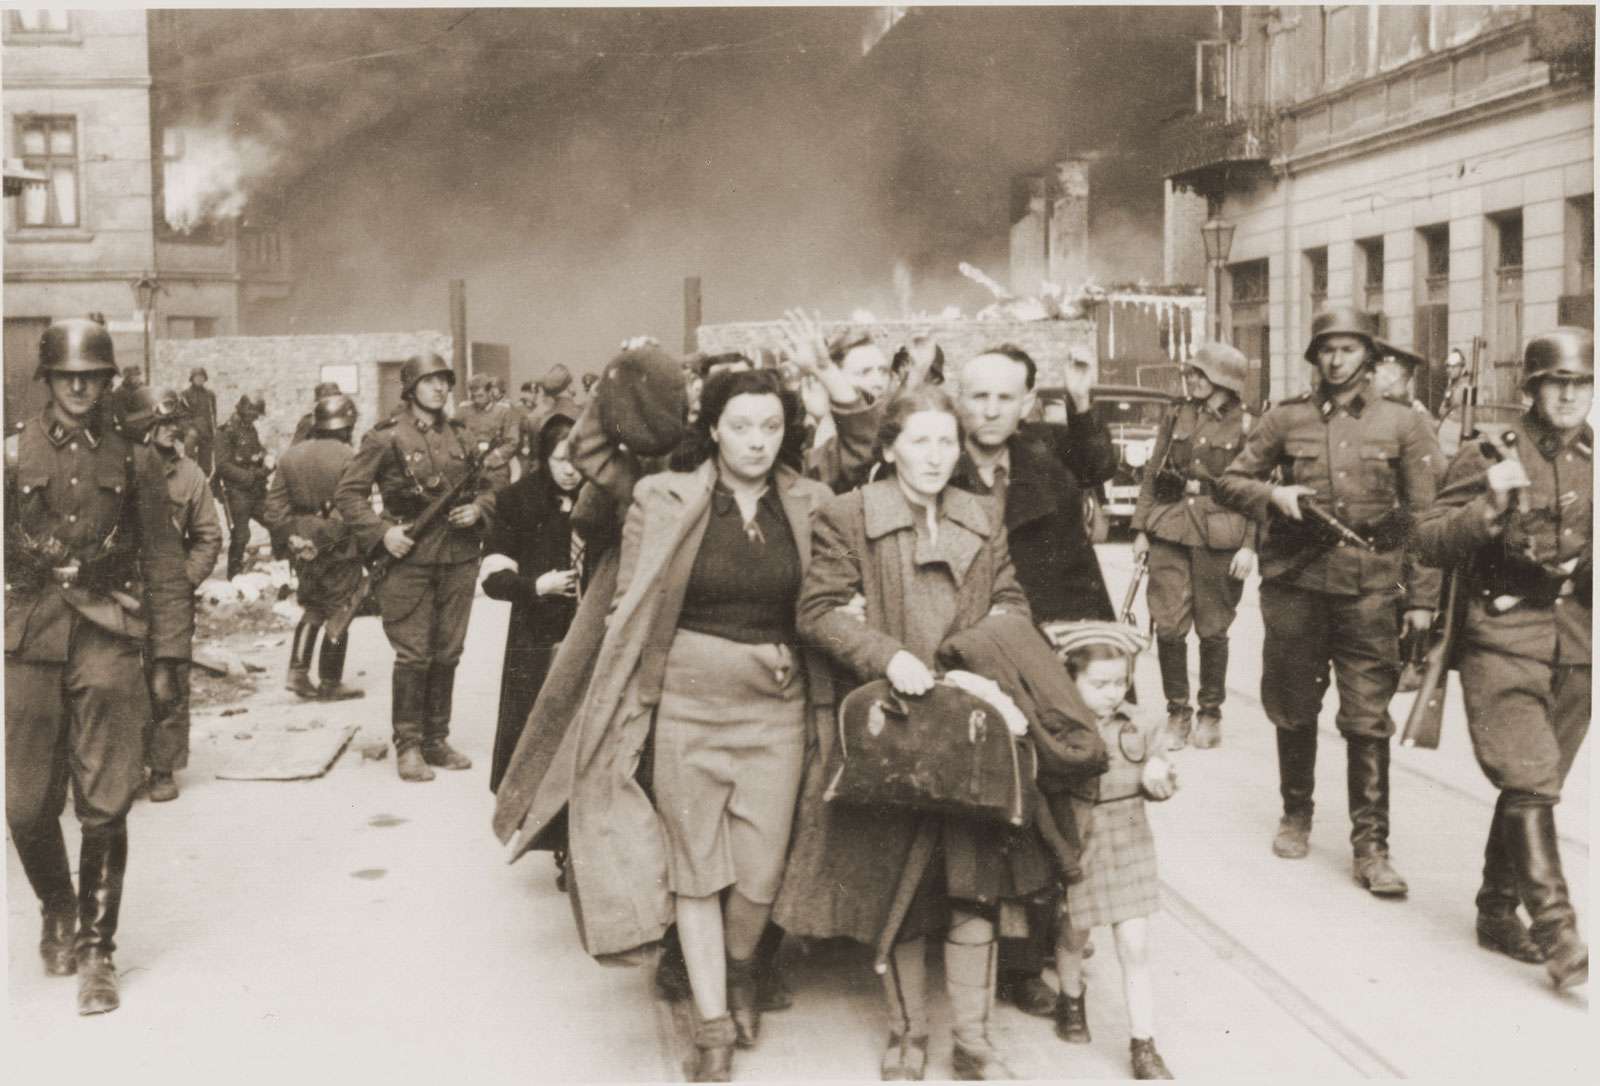 image for Warsaw Ghetto Uprising | Definition, Facts, & History